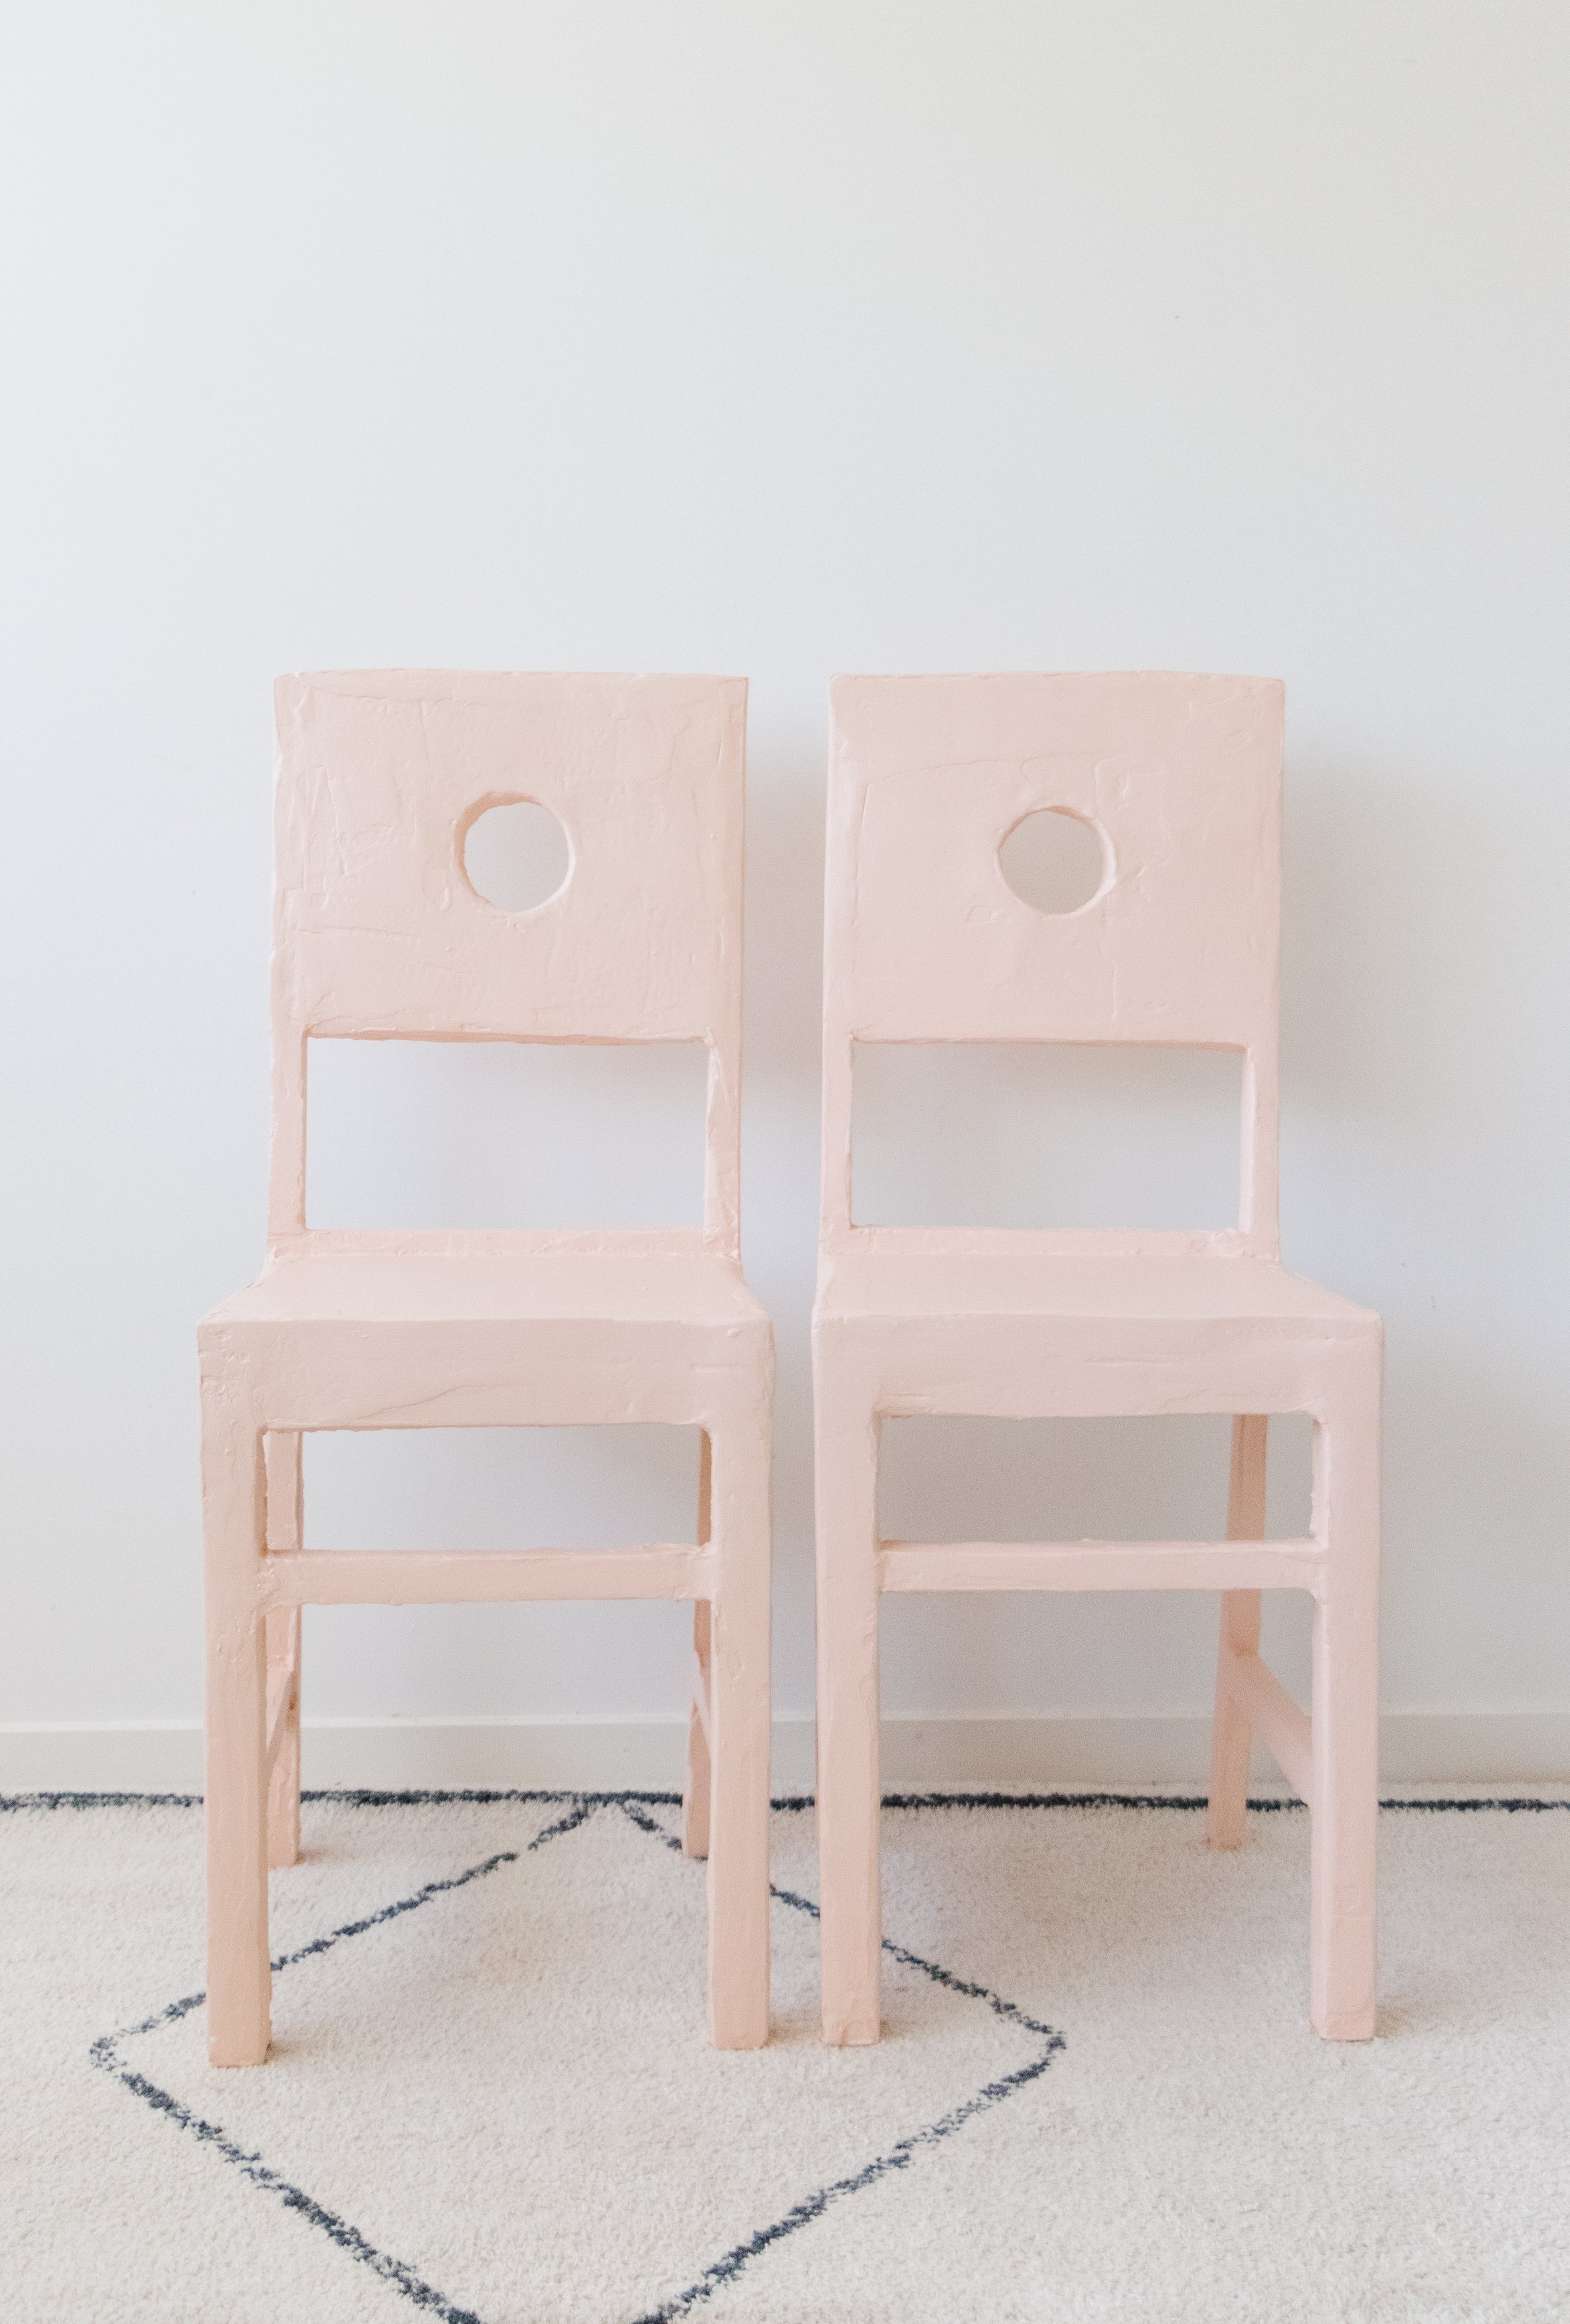 Upcycled Plaster Dining Chairs_Jaharn Quinn (1 of 1).jpg